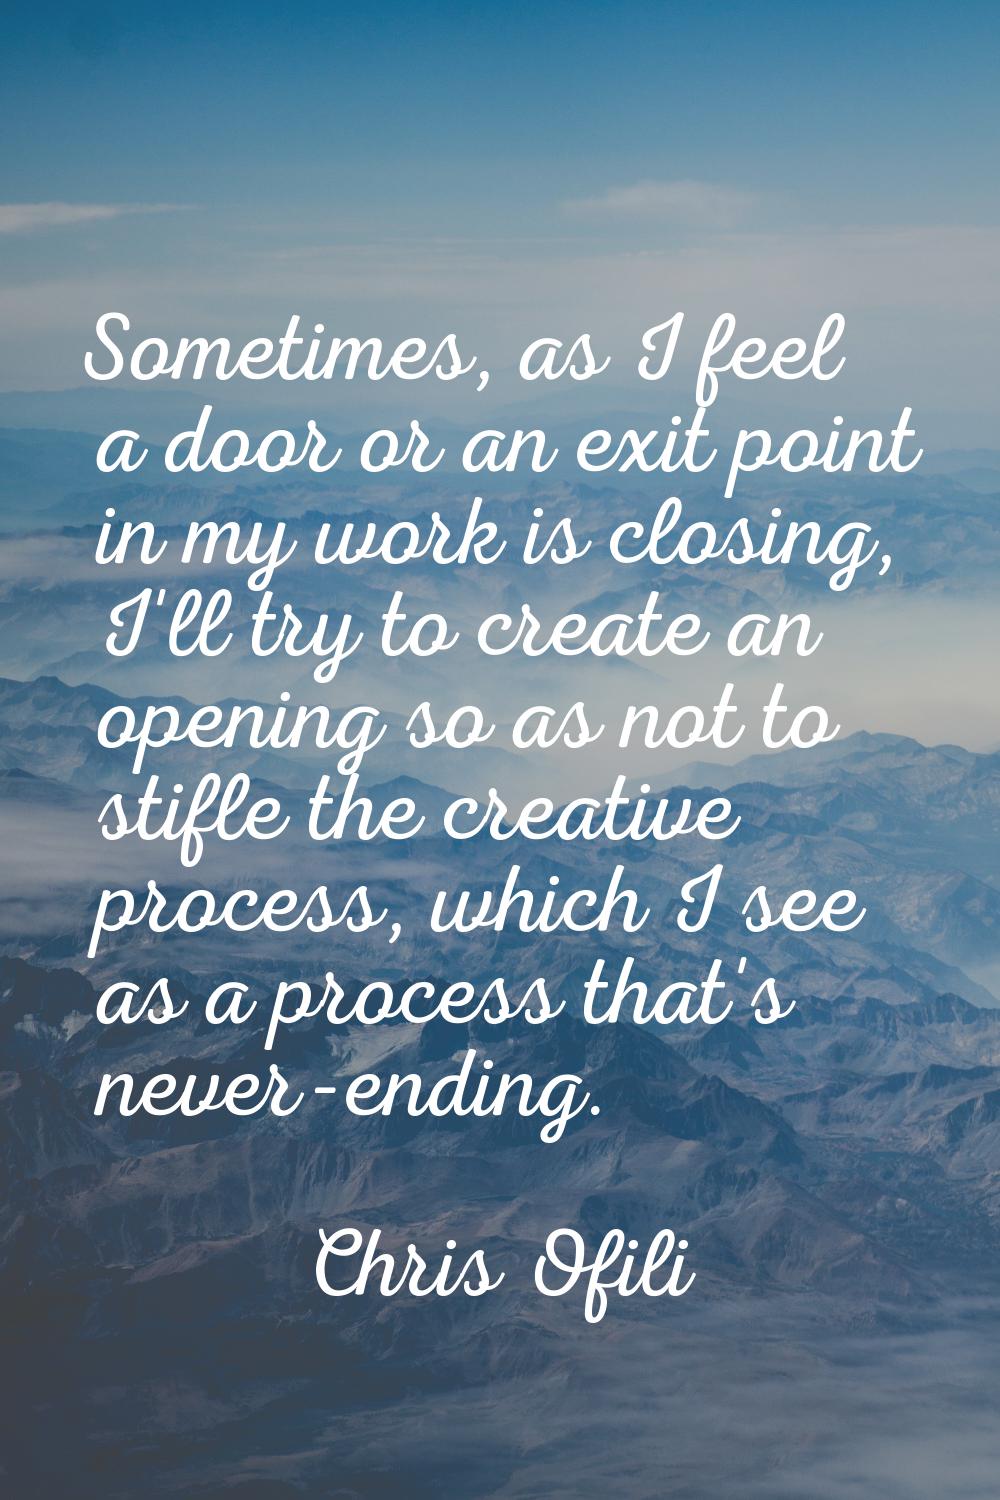 Sometimes, as I feel a door or an exit point in my work is closing, I'll try to create an opening s